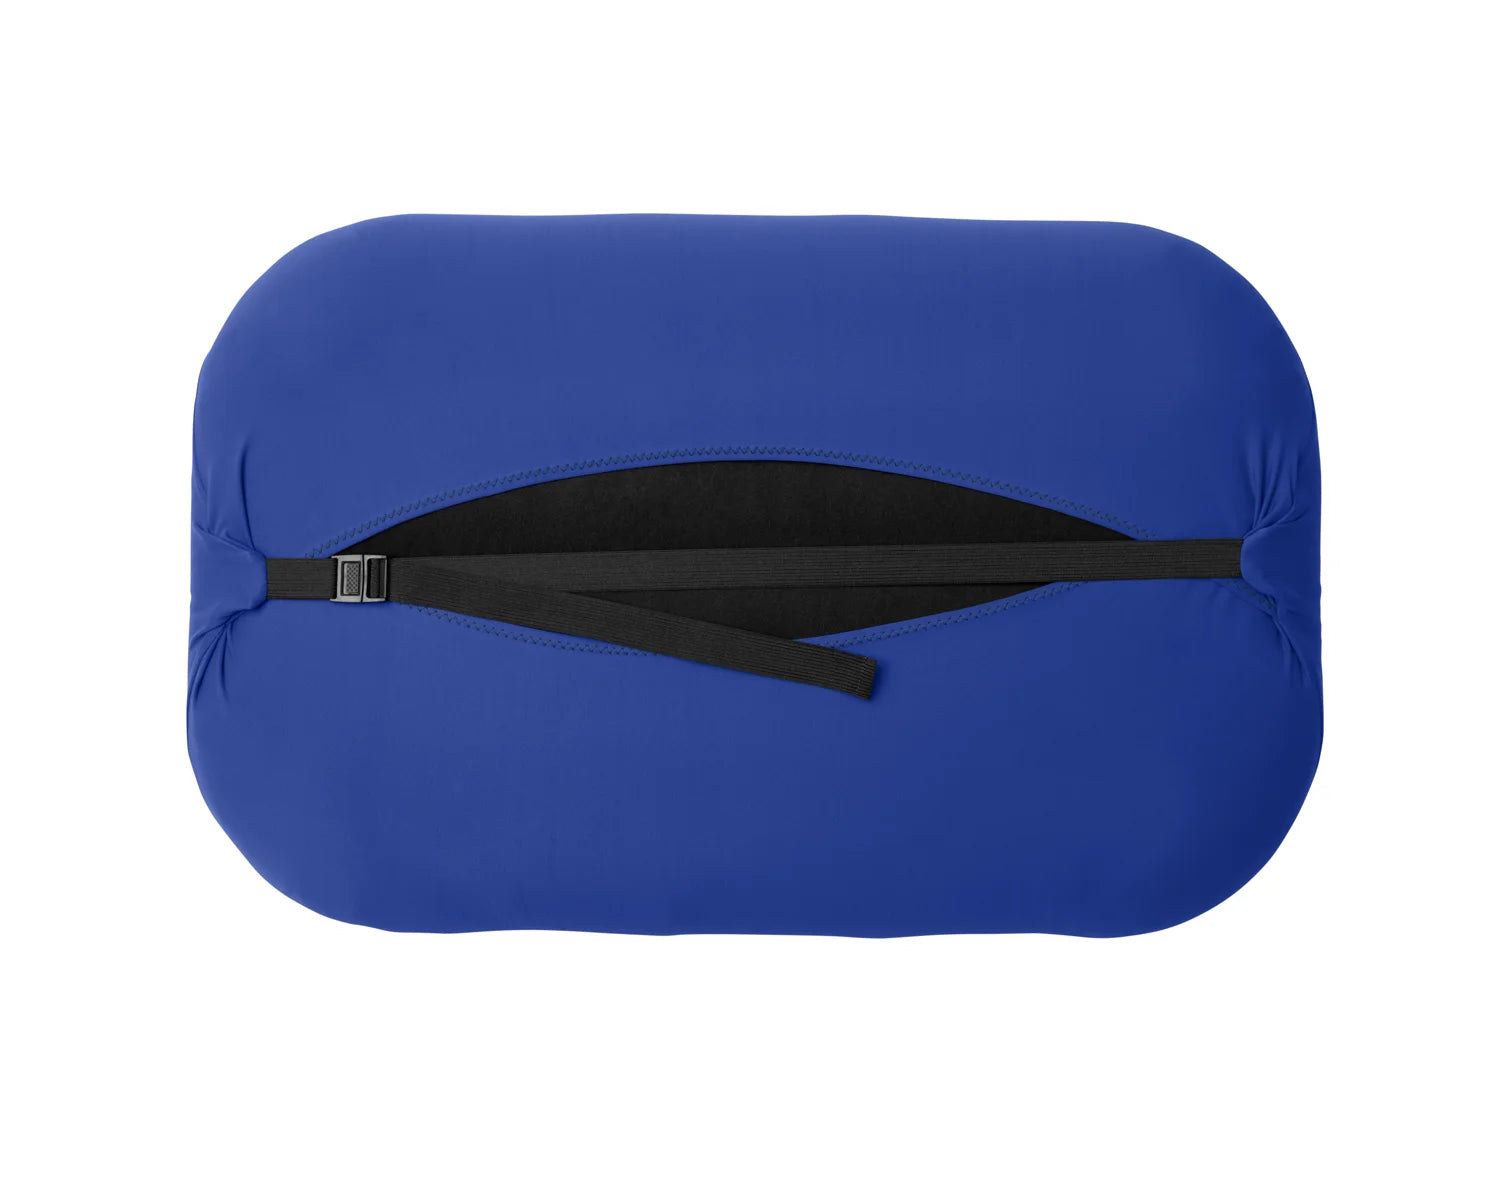 Trifold enclosure and strap of large in blue Pillow Strap to securely hold camp pillow to sleeping pad.